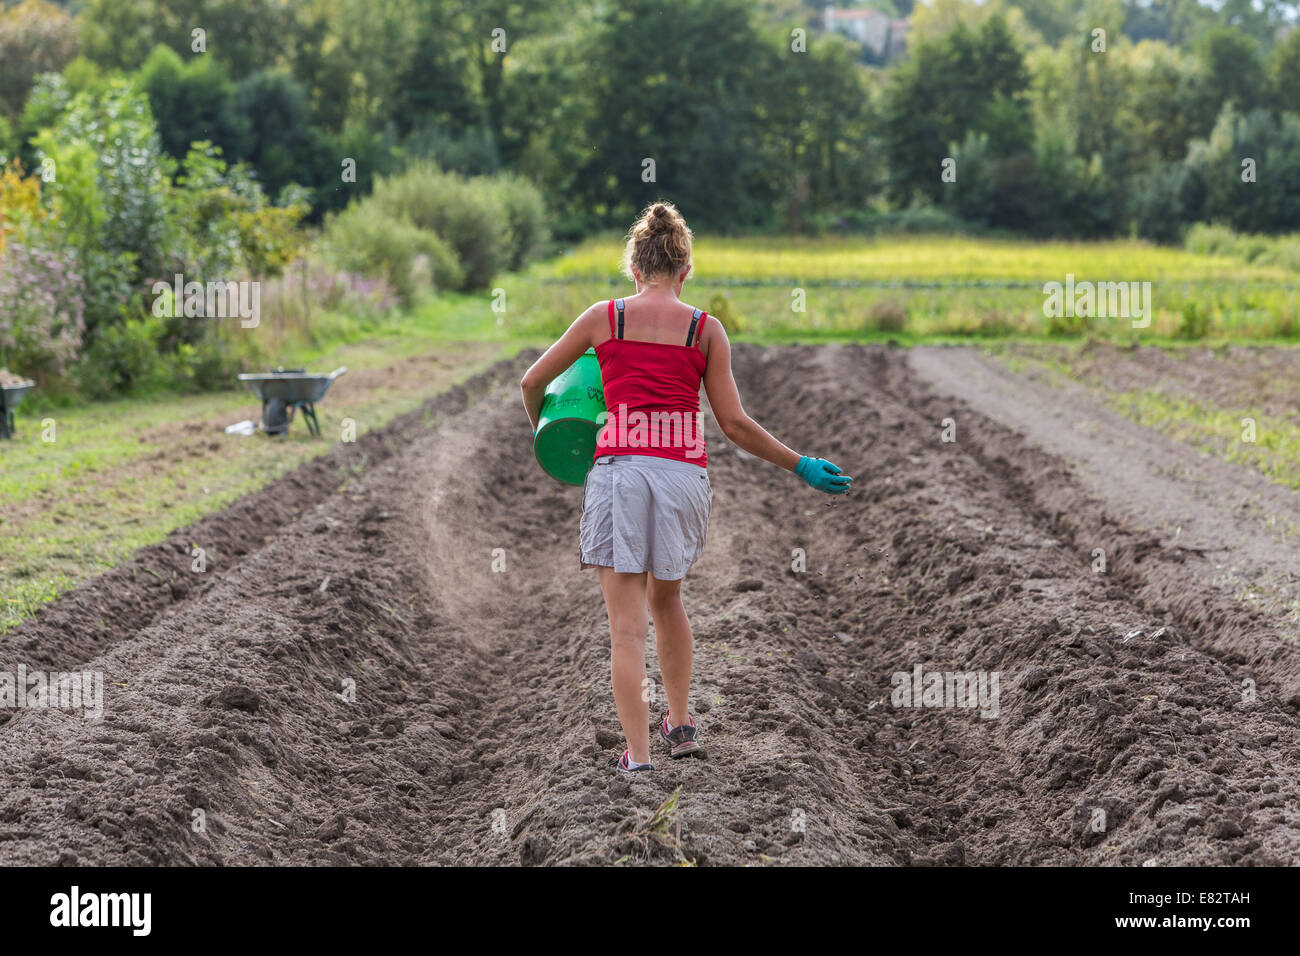 Agricultural worker, Fruits and vegetables picking self service, Soyaux, Charente, France. Stock Photo